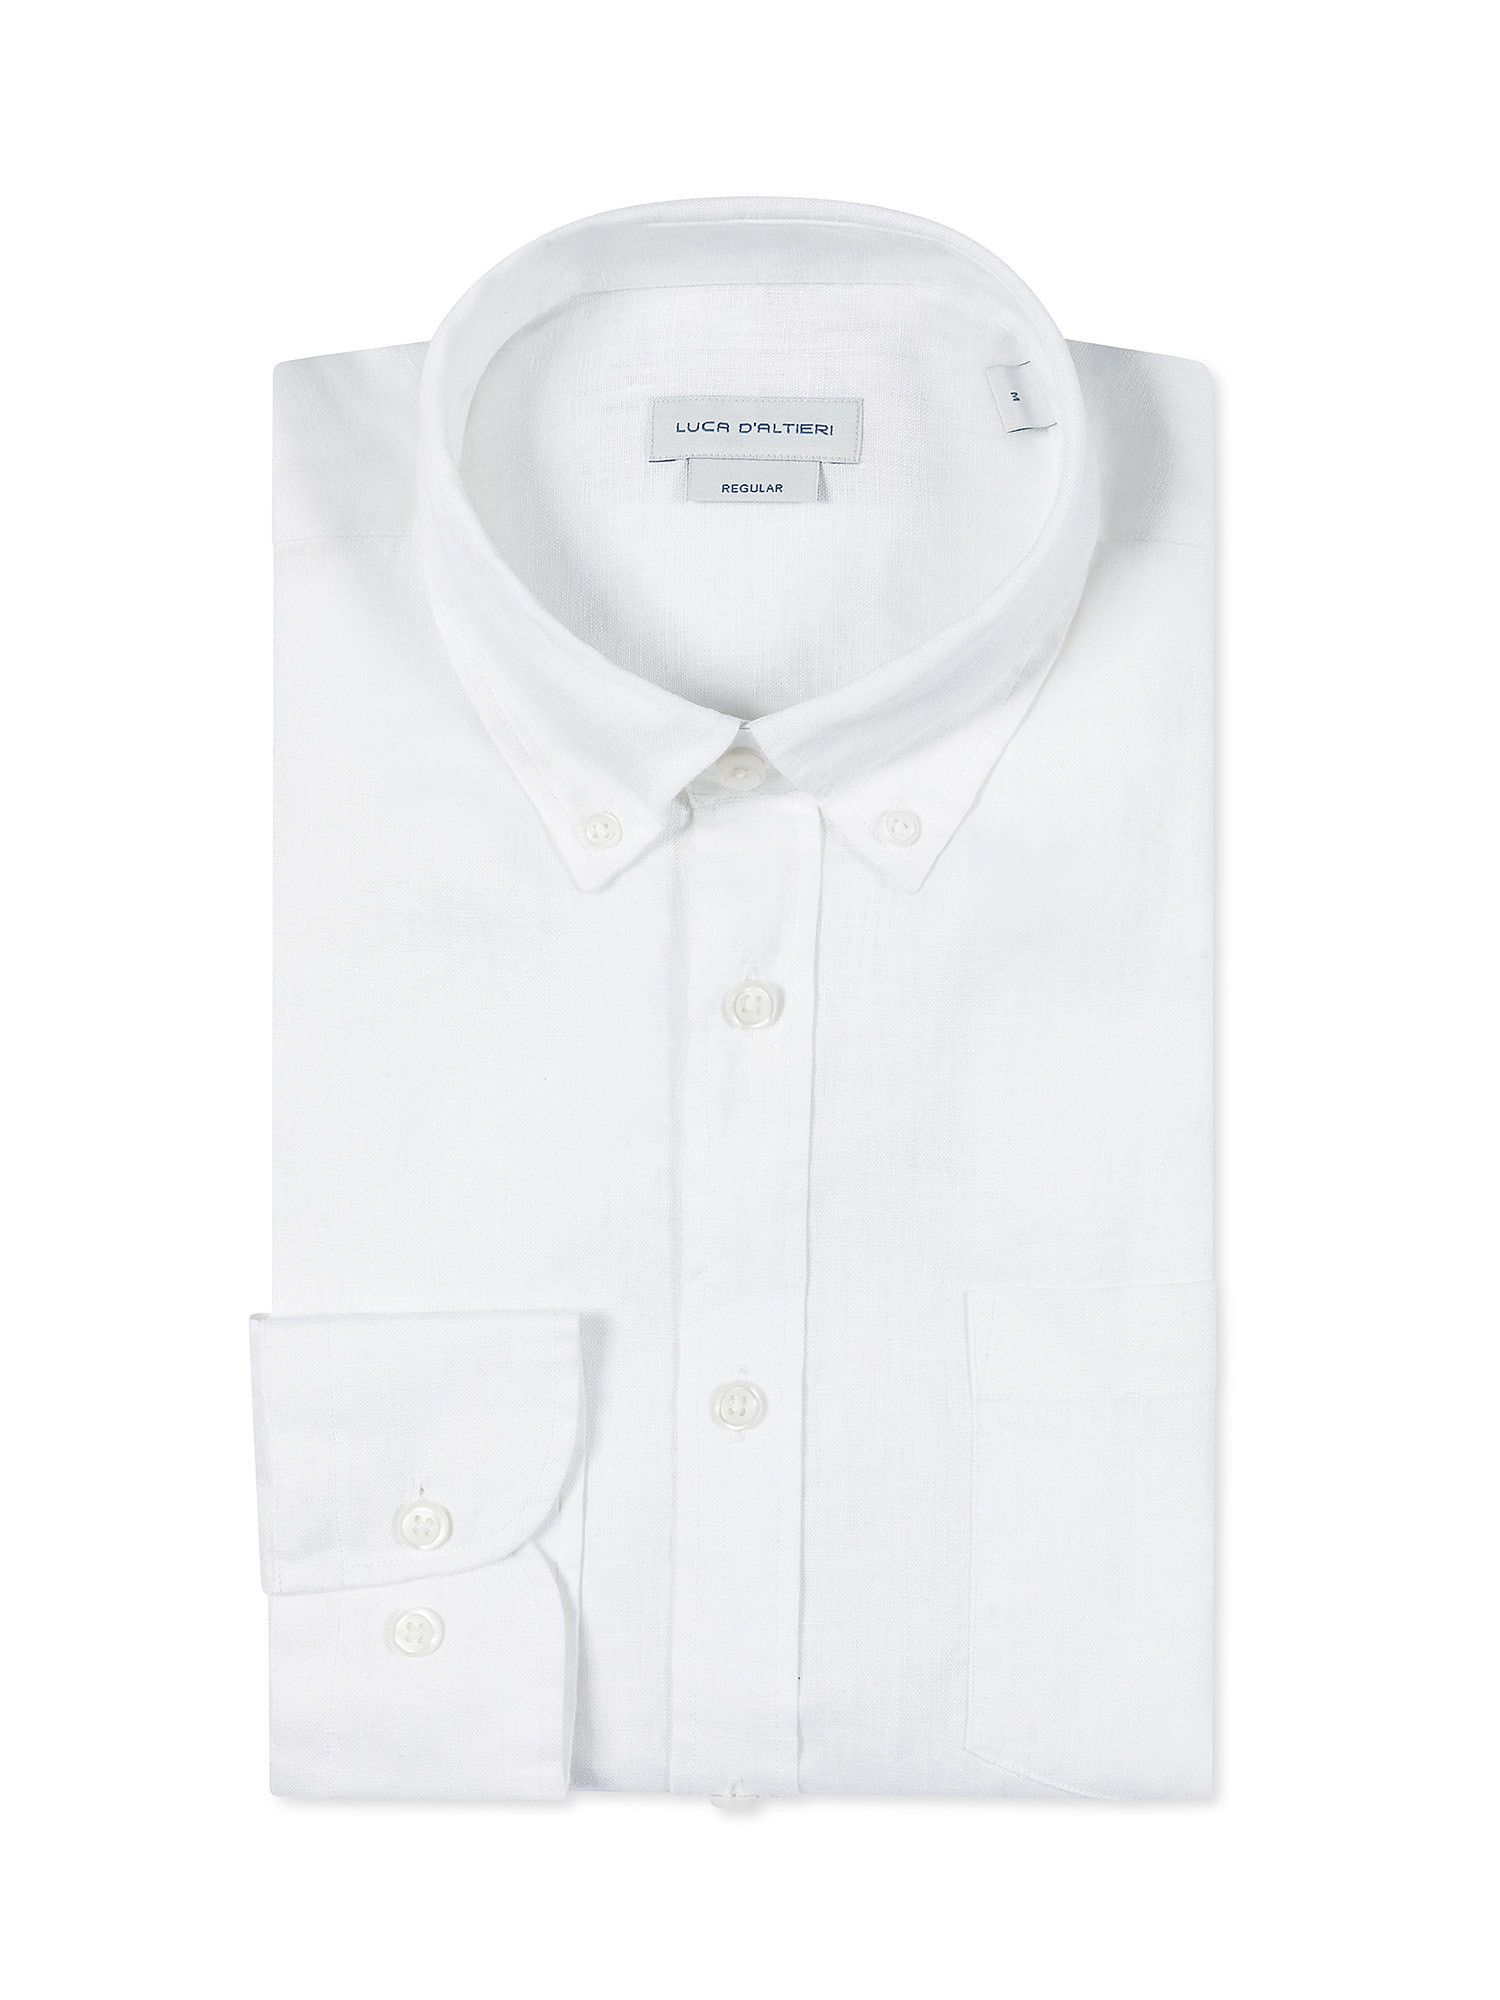 Luca D'Altieri - Regular fit shirt in pure linen, White, large image number 2